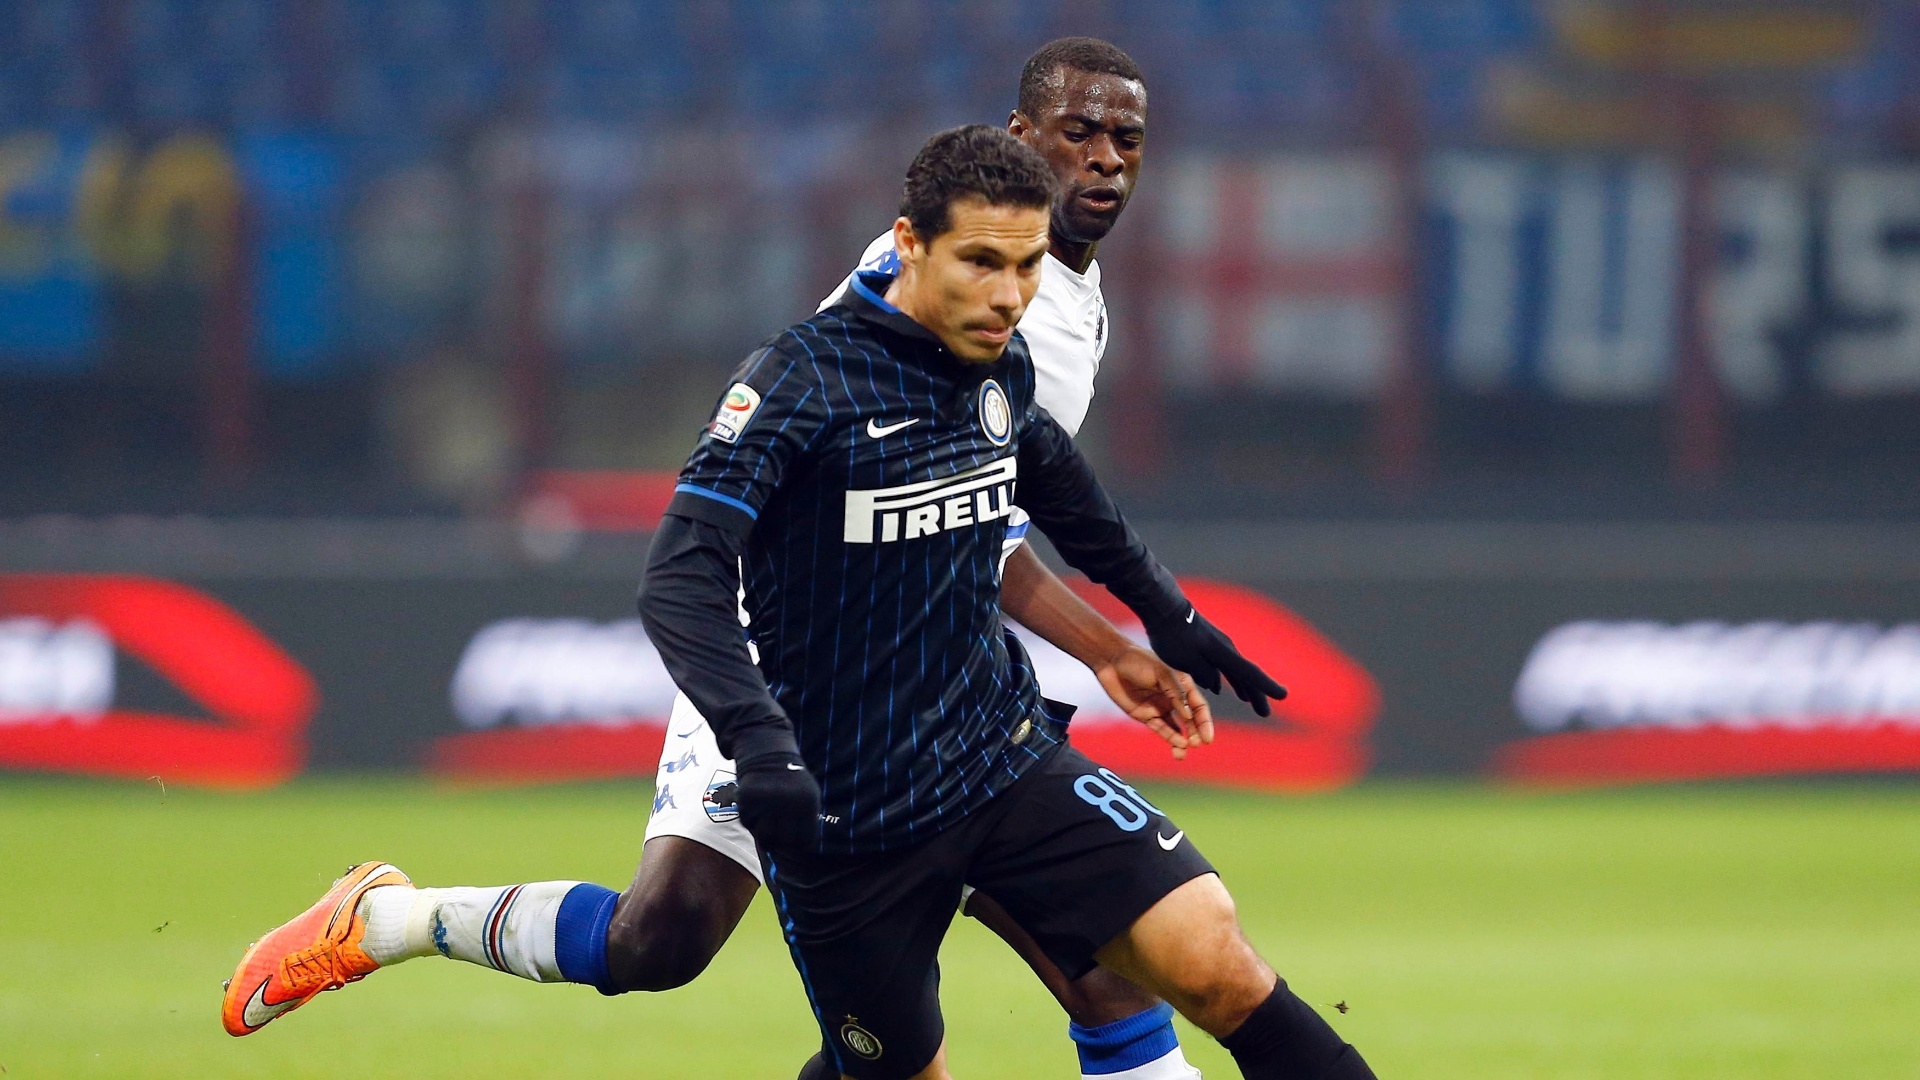 Hernanes to MP: “Sorry, We Did Our Best”